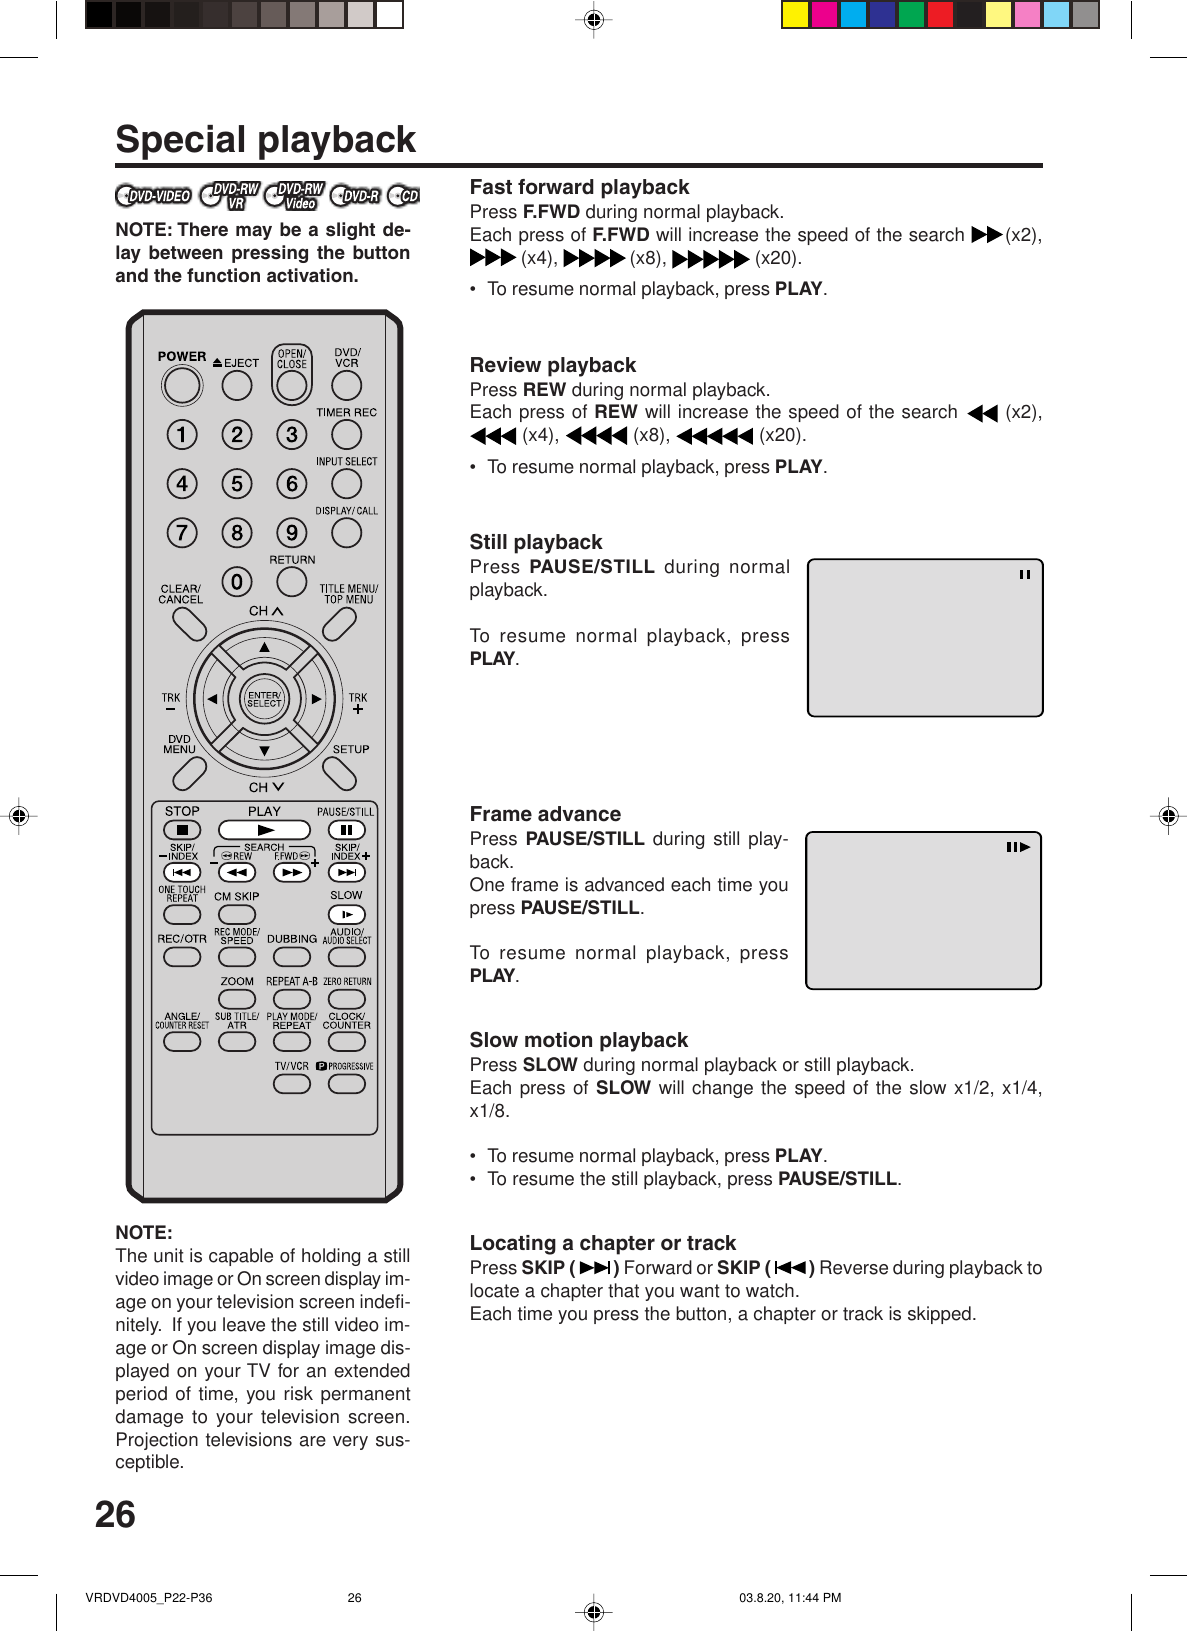 26Special playbackNOTE: There may be a slight de-lay between pressing the buttonand the function activation.NOTE:The unit is capable of holding a stillvideo image or On screen display im-age on your television screen indefi-nitely.  If you leave the still video im-age or On screen display image dis-played on your TV for an extendedperiod of time, you risk permanentdamage to your television screen.Projection televisions are very sus-ceptible.Fast forward playbackPress F.FWD during normal playback.Each press of F.FWD will increase the speed of the search  (x2),(x4),  (x8),   (x20).•To resume normal playback, press PLAY.Review playbackPress REW during normal playback.Each press of REW will increase the speed of the search   (x2), (x4),   (x8),   (x20).•To resume normal playback, press PLAY.Still playbackPress PAUSE/STILL  during normalplayback.To resume normal playback, pressPLAY.Frame advancePress PAUSE/STILL  during still play-back.One frame is advanced each time youpress PAUSE/STILL.To resume normal playback, pressPLAY.Slow motion playbackPress SLOW during normal playback or still playback.Each press of SLOW will change the speed of the slow x1/2, x1/4,x1/8.•To resume normal playback, press PLAY.•To resume the still playback, press PAUSE/STILL.Locating a chapter or trackPress SKIP ( ) Forward or SKIP ( ) Reverse during playback tolocate a chapter that you want to watch.Each time you press the button, a chapter or track is skipped.VRDVD4005_P22-P36 03.8.20, 11:44 PM26